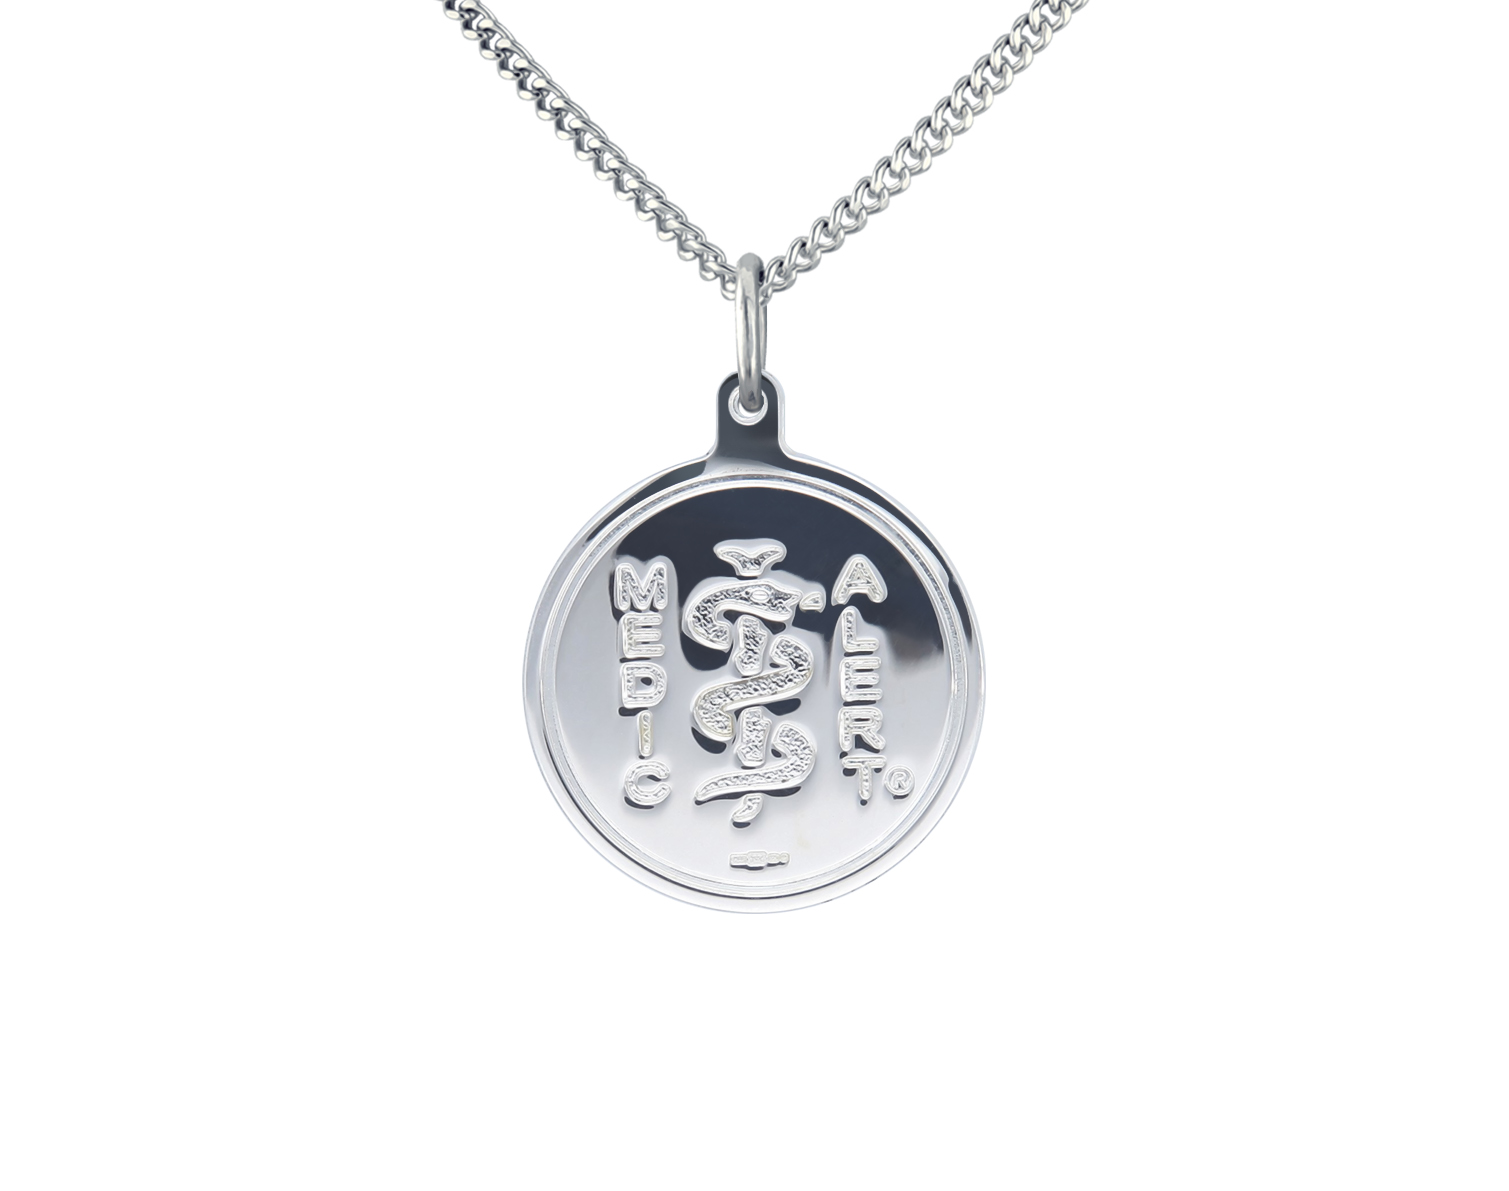 Silver chain with round silver charm disc with  MedicAlert logo which includes the universal medical sign of a snake wrapped around a rod